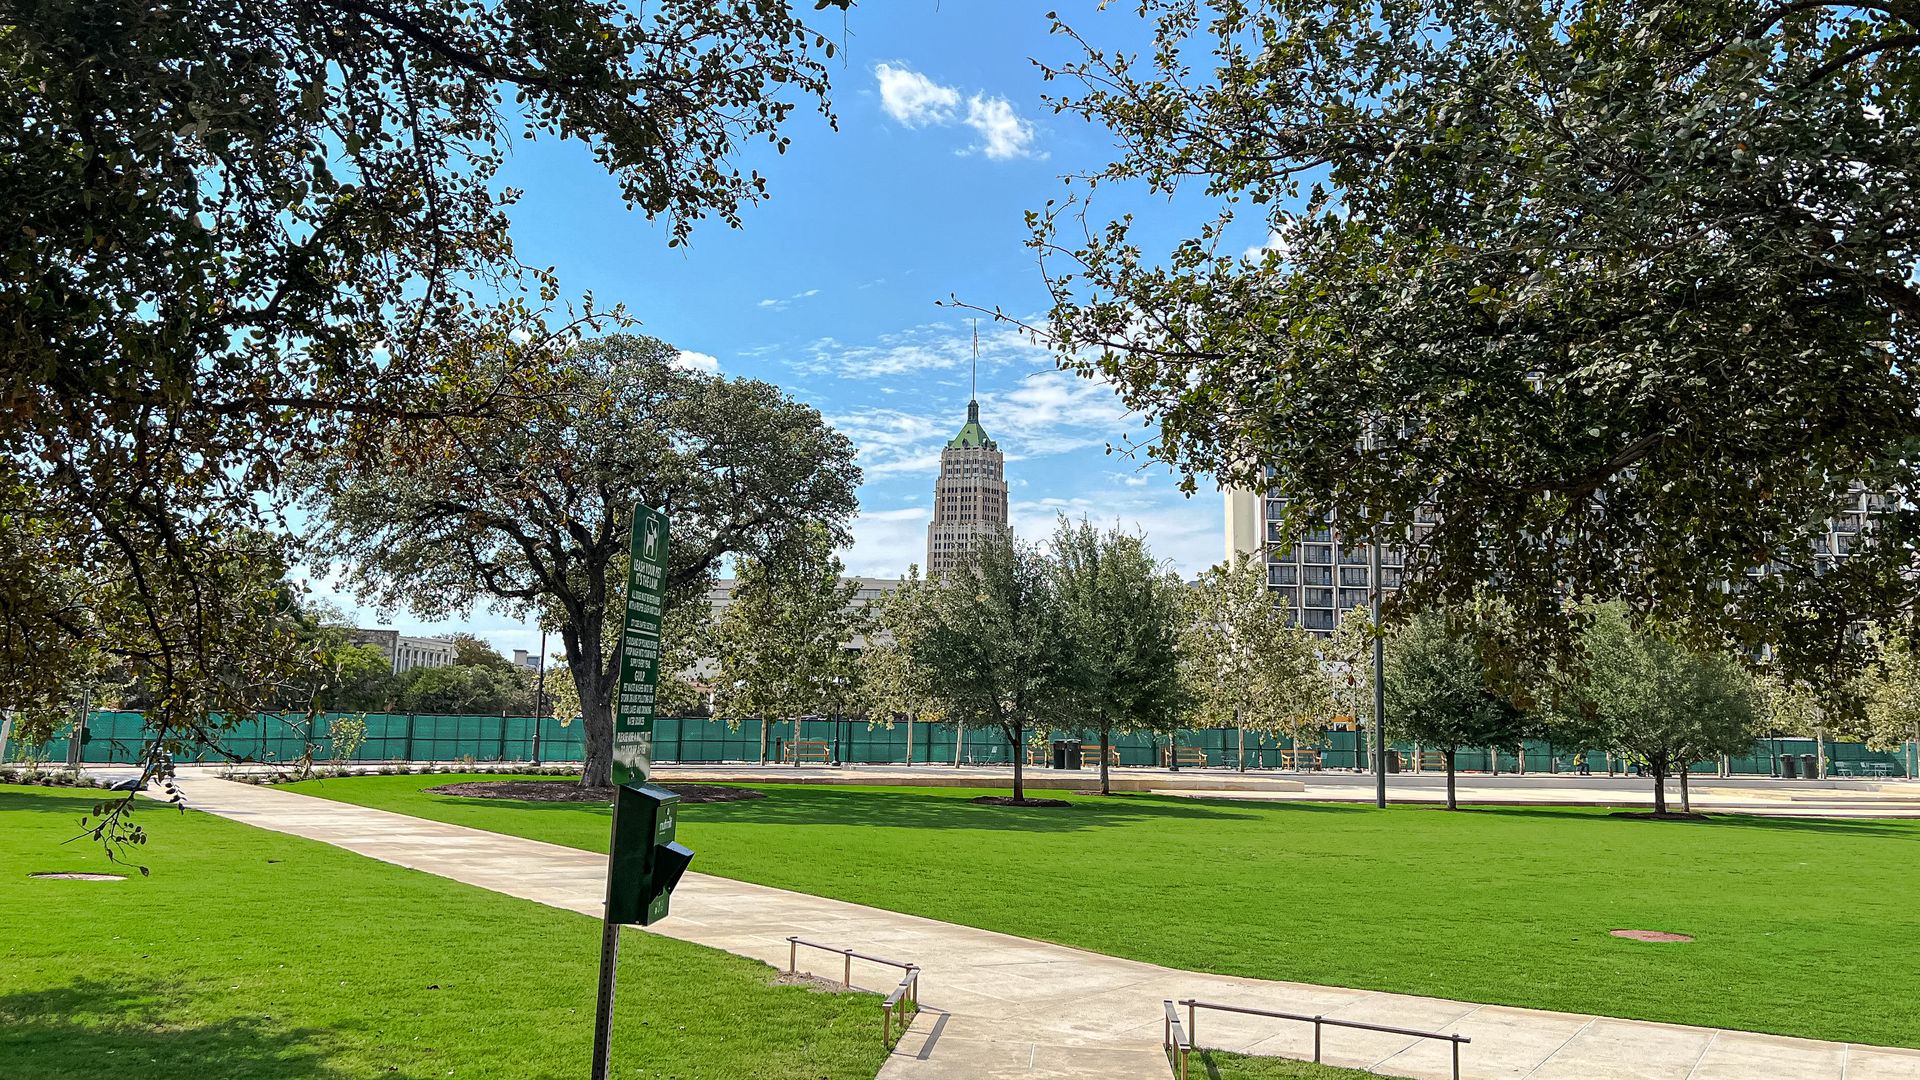 The Tower Life building is seen across from the great lawn at Civic Park.